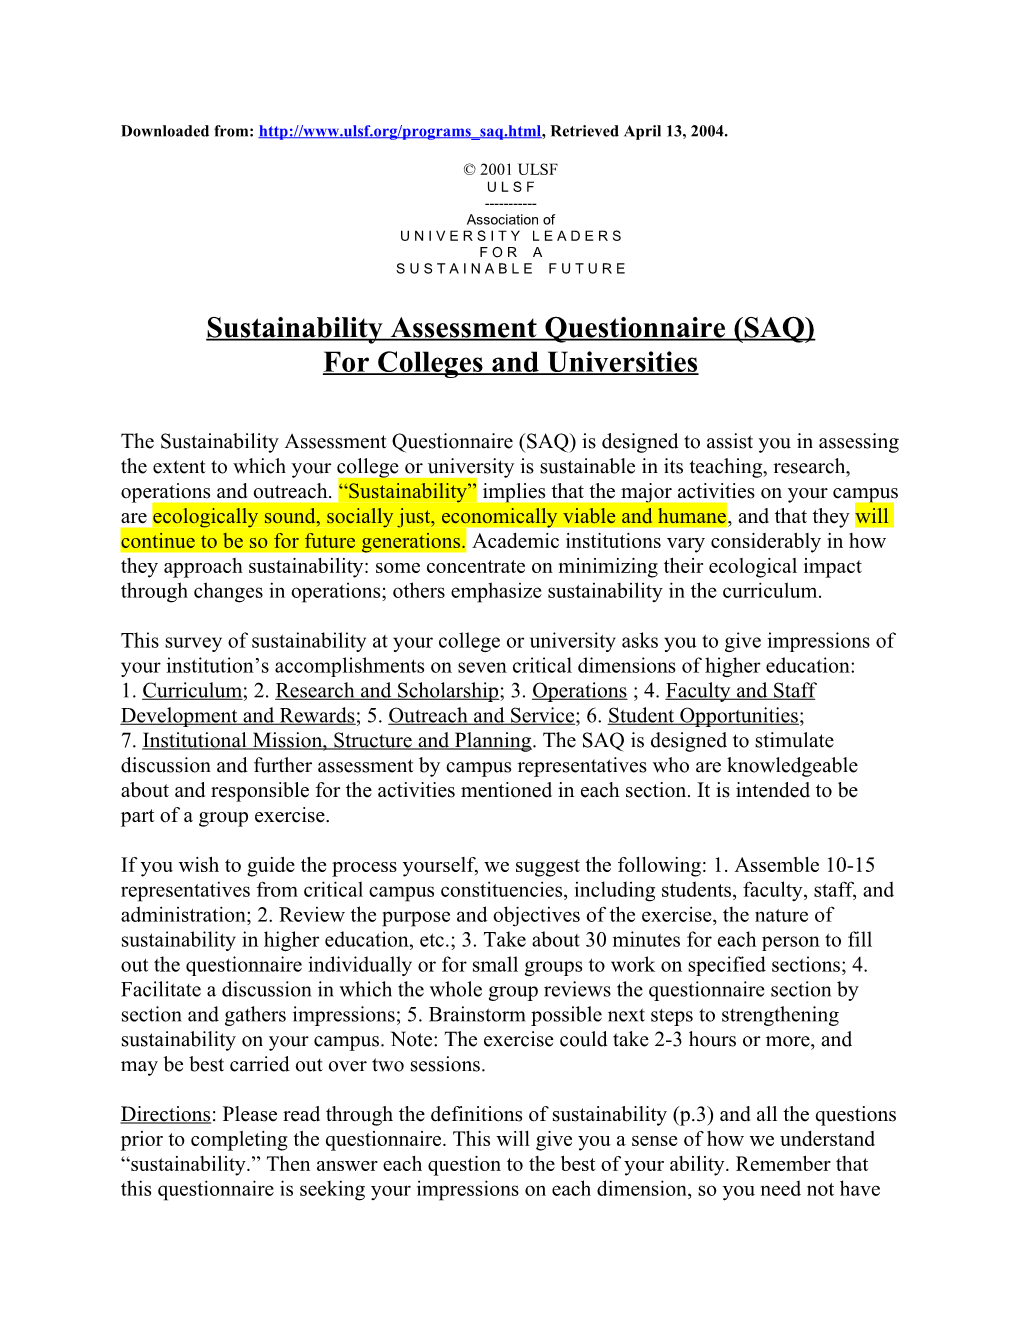 Sustainability Assessment Questionnaire (SAQ)